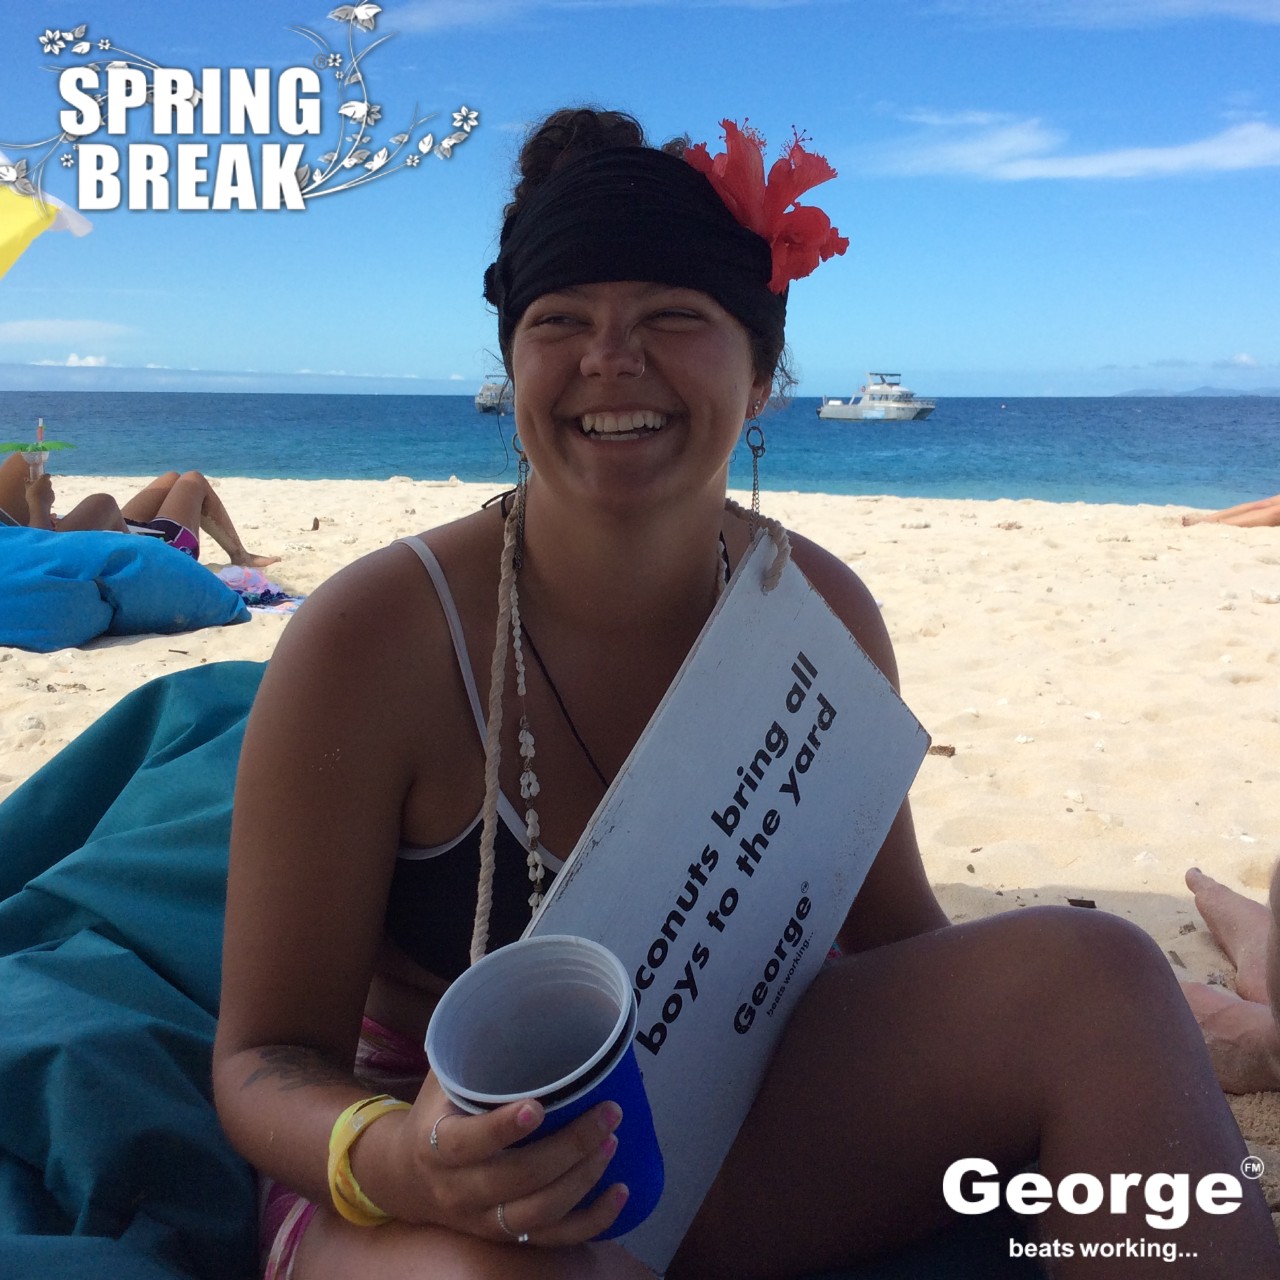  All our George Cam pics will make you relive your Spring Break 2017